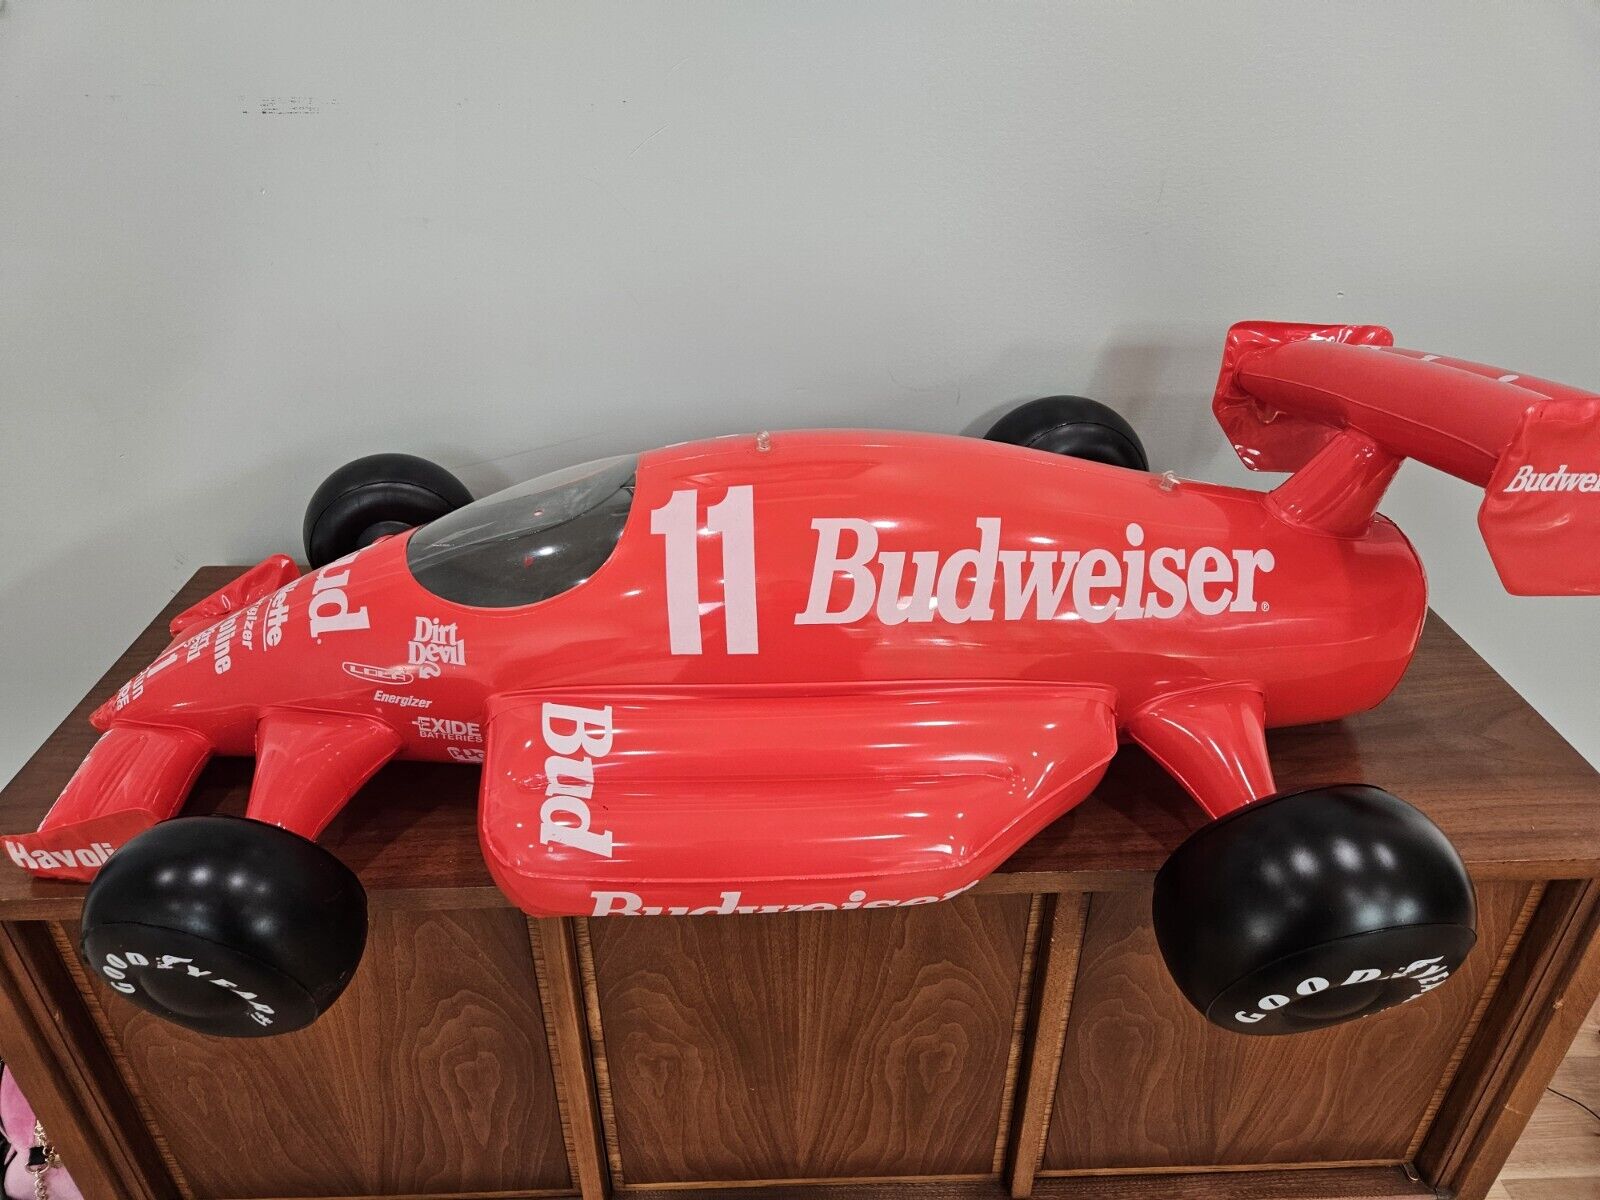 Vintage Inflatable Budweiser #11 Racing Car 42” Of Cool Hanging Beer Decoration